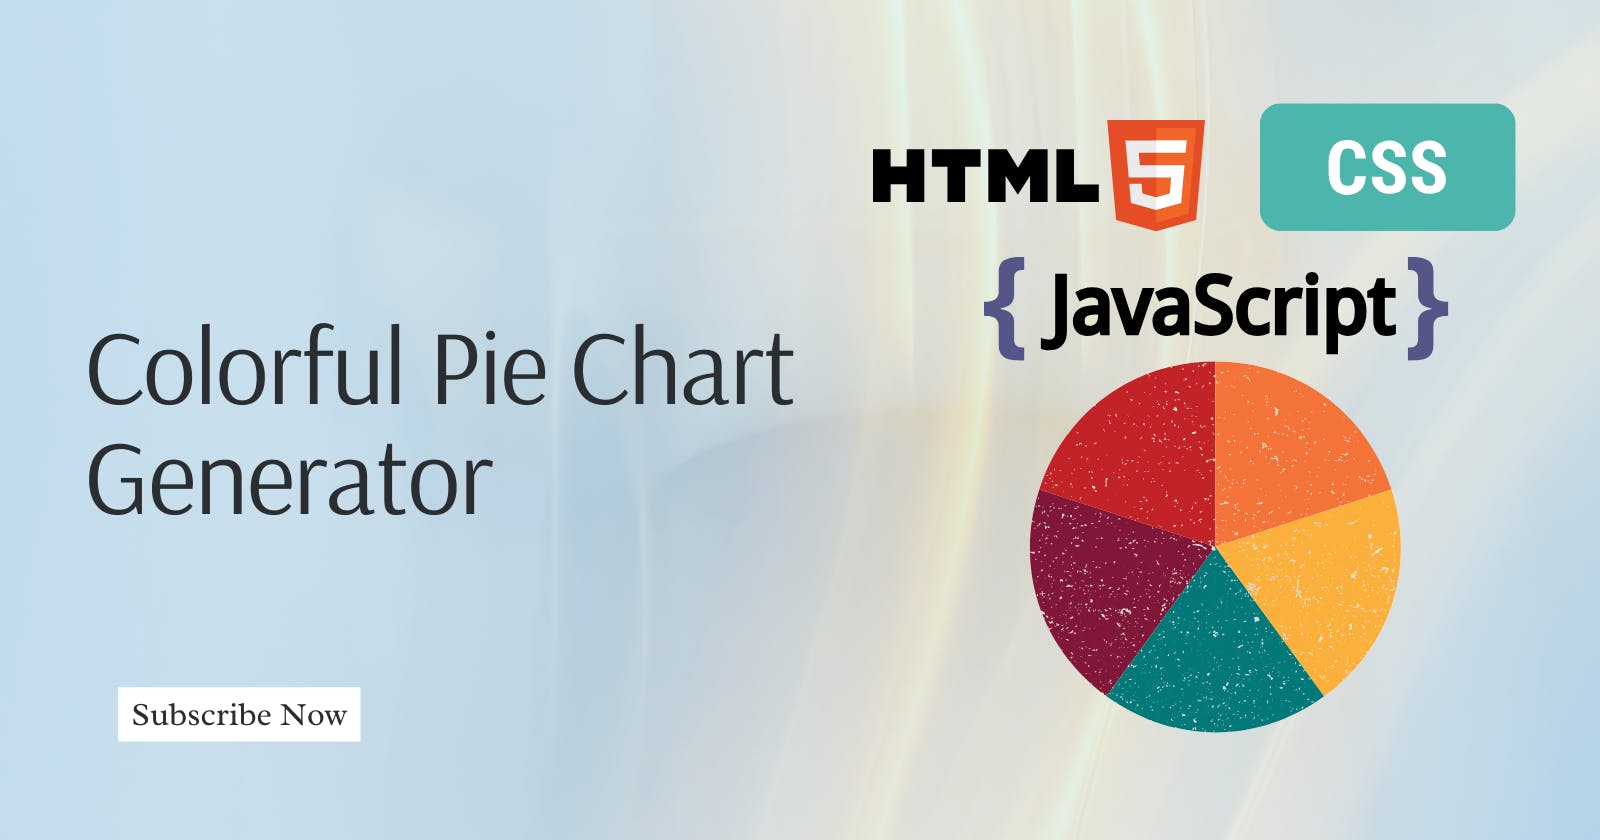 How To Create a Colorful Pie Chart Generator Using HTML, CSS, and JavaScript